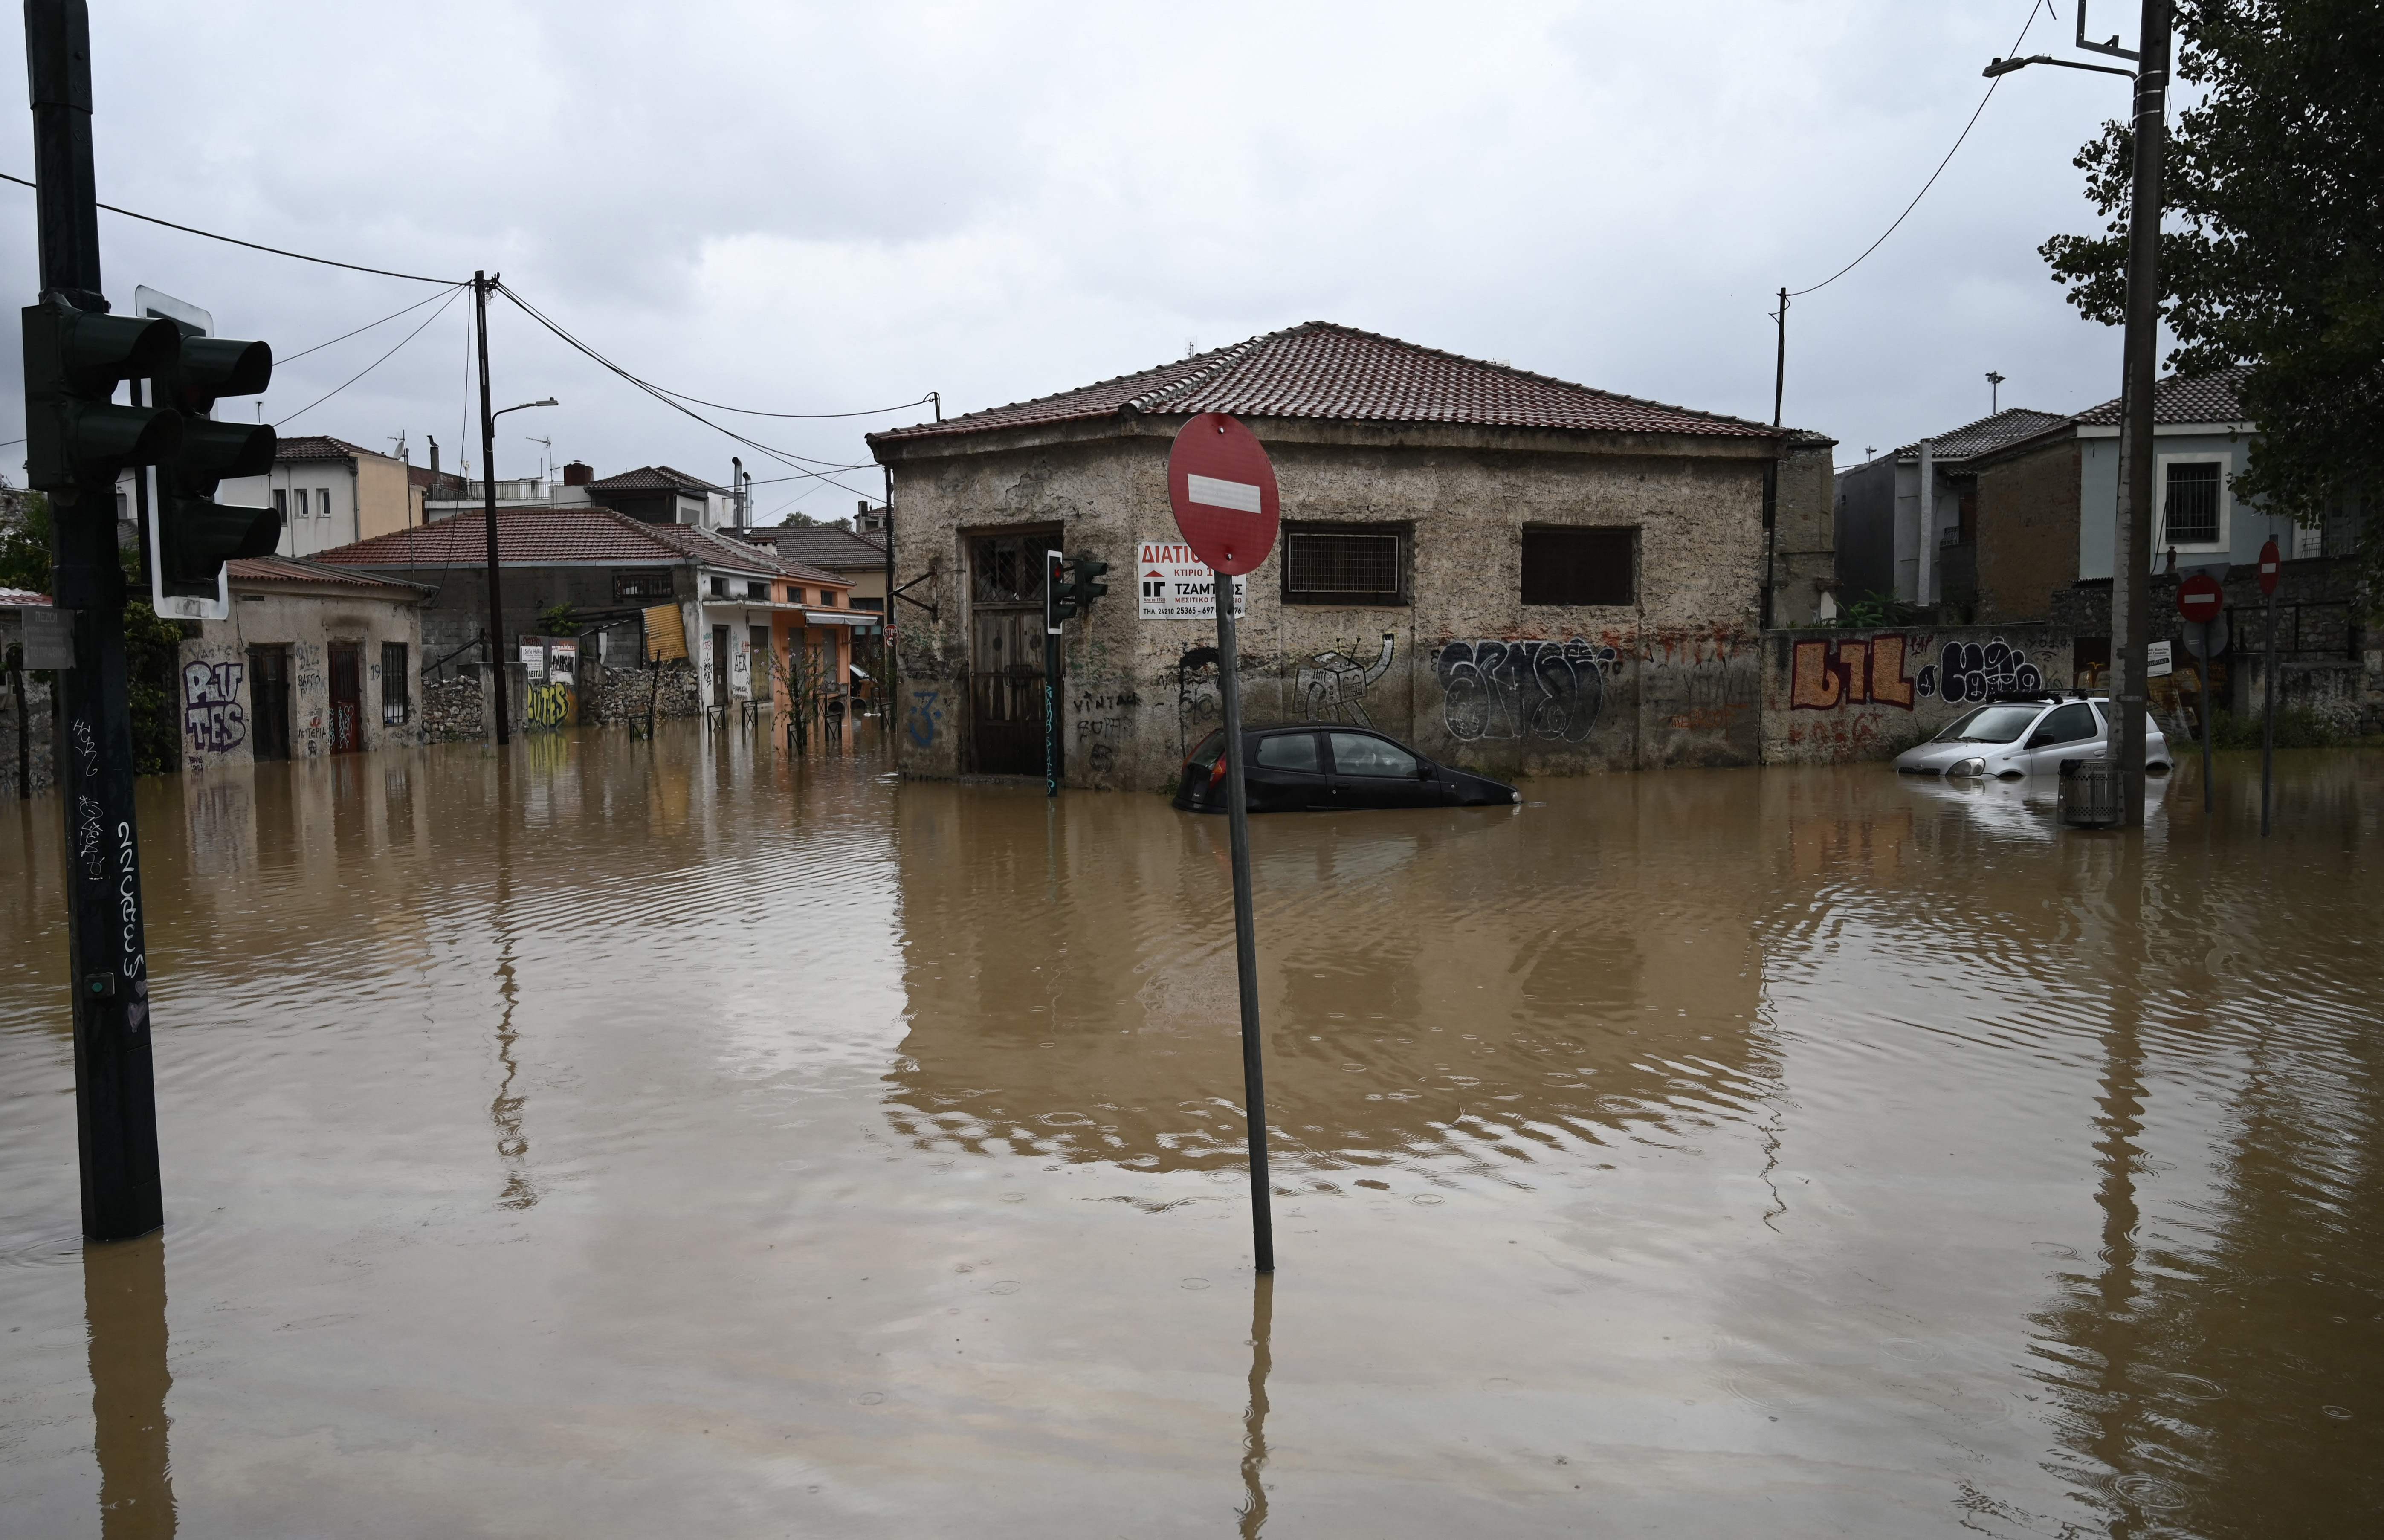 Cars in a flooded road in the city of Volos, central Greece